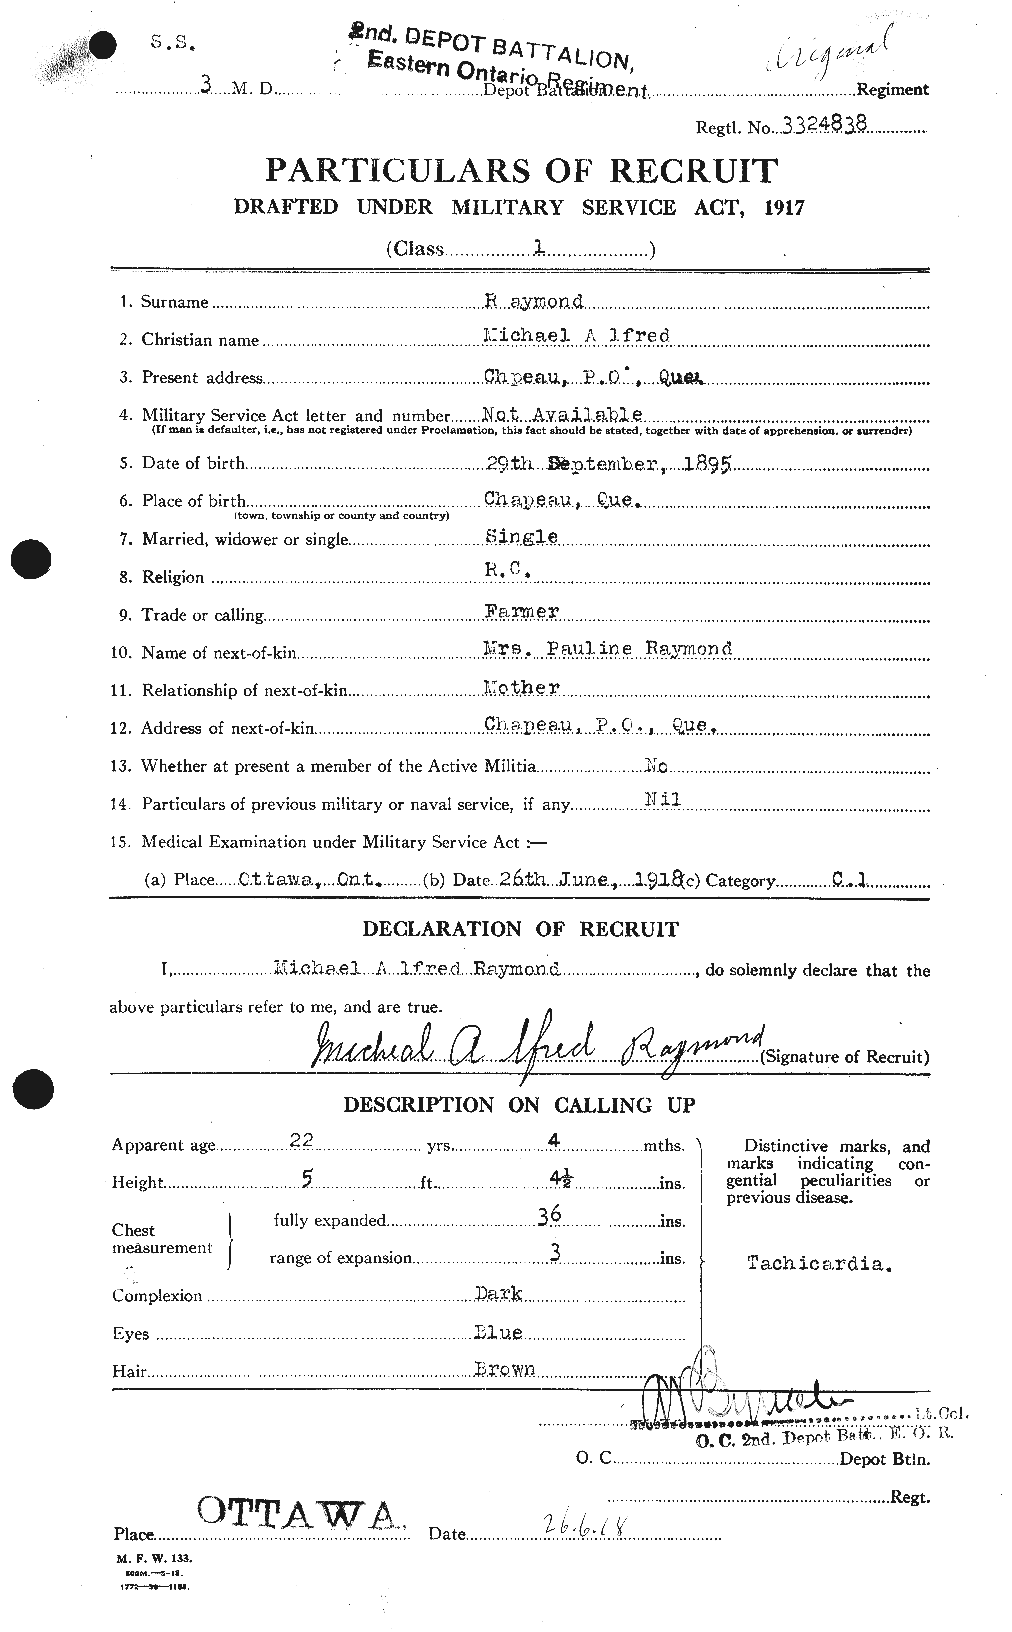 Personnel Records of the First World War - CEF 595421a